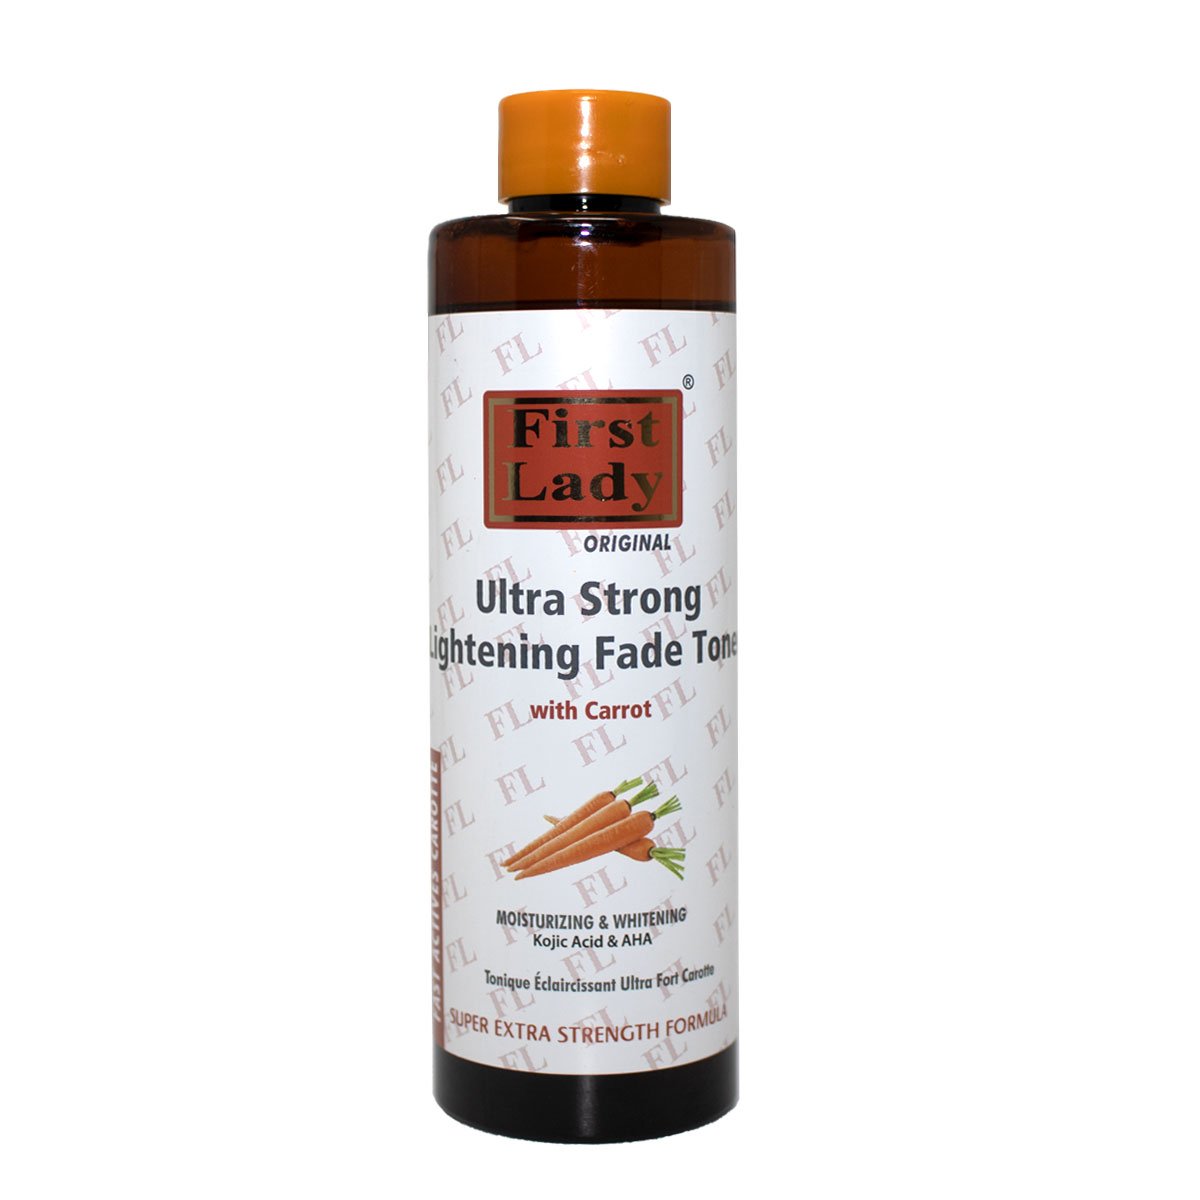 First Lady Fast Actives Ultra Strong Lightening Face Cleansing Fade Toner With Carrot